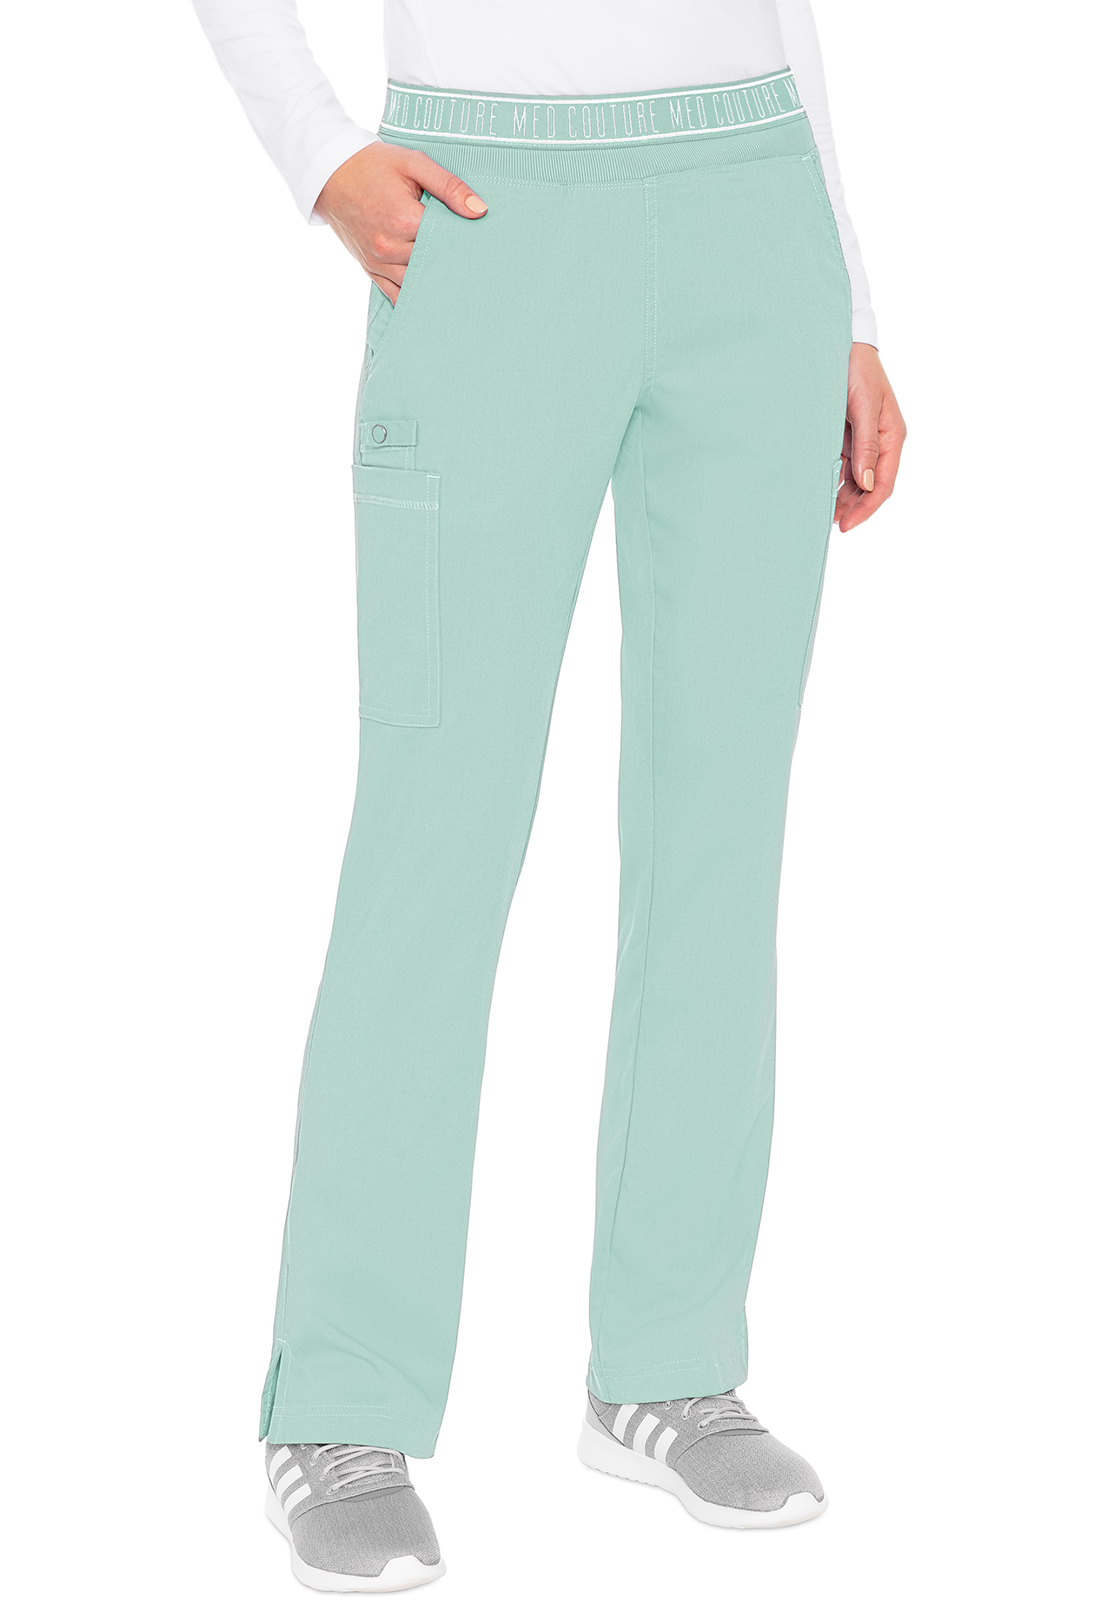 Yoga 2 Cargo Pocket Pant-Med Couture